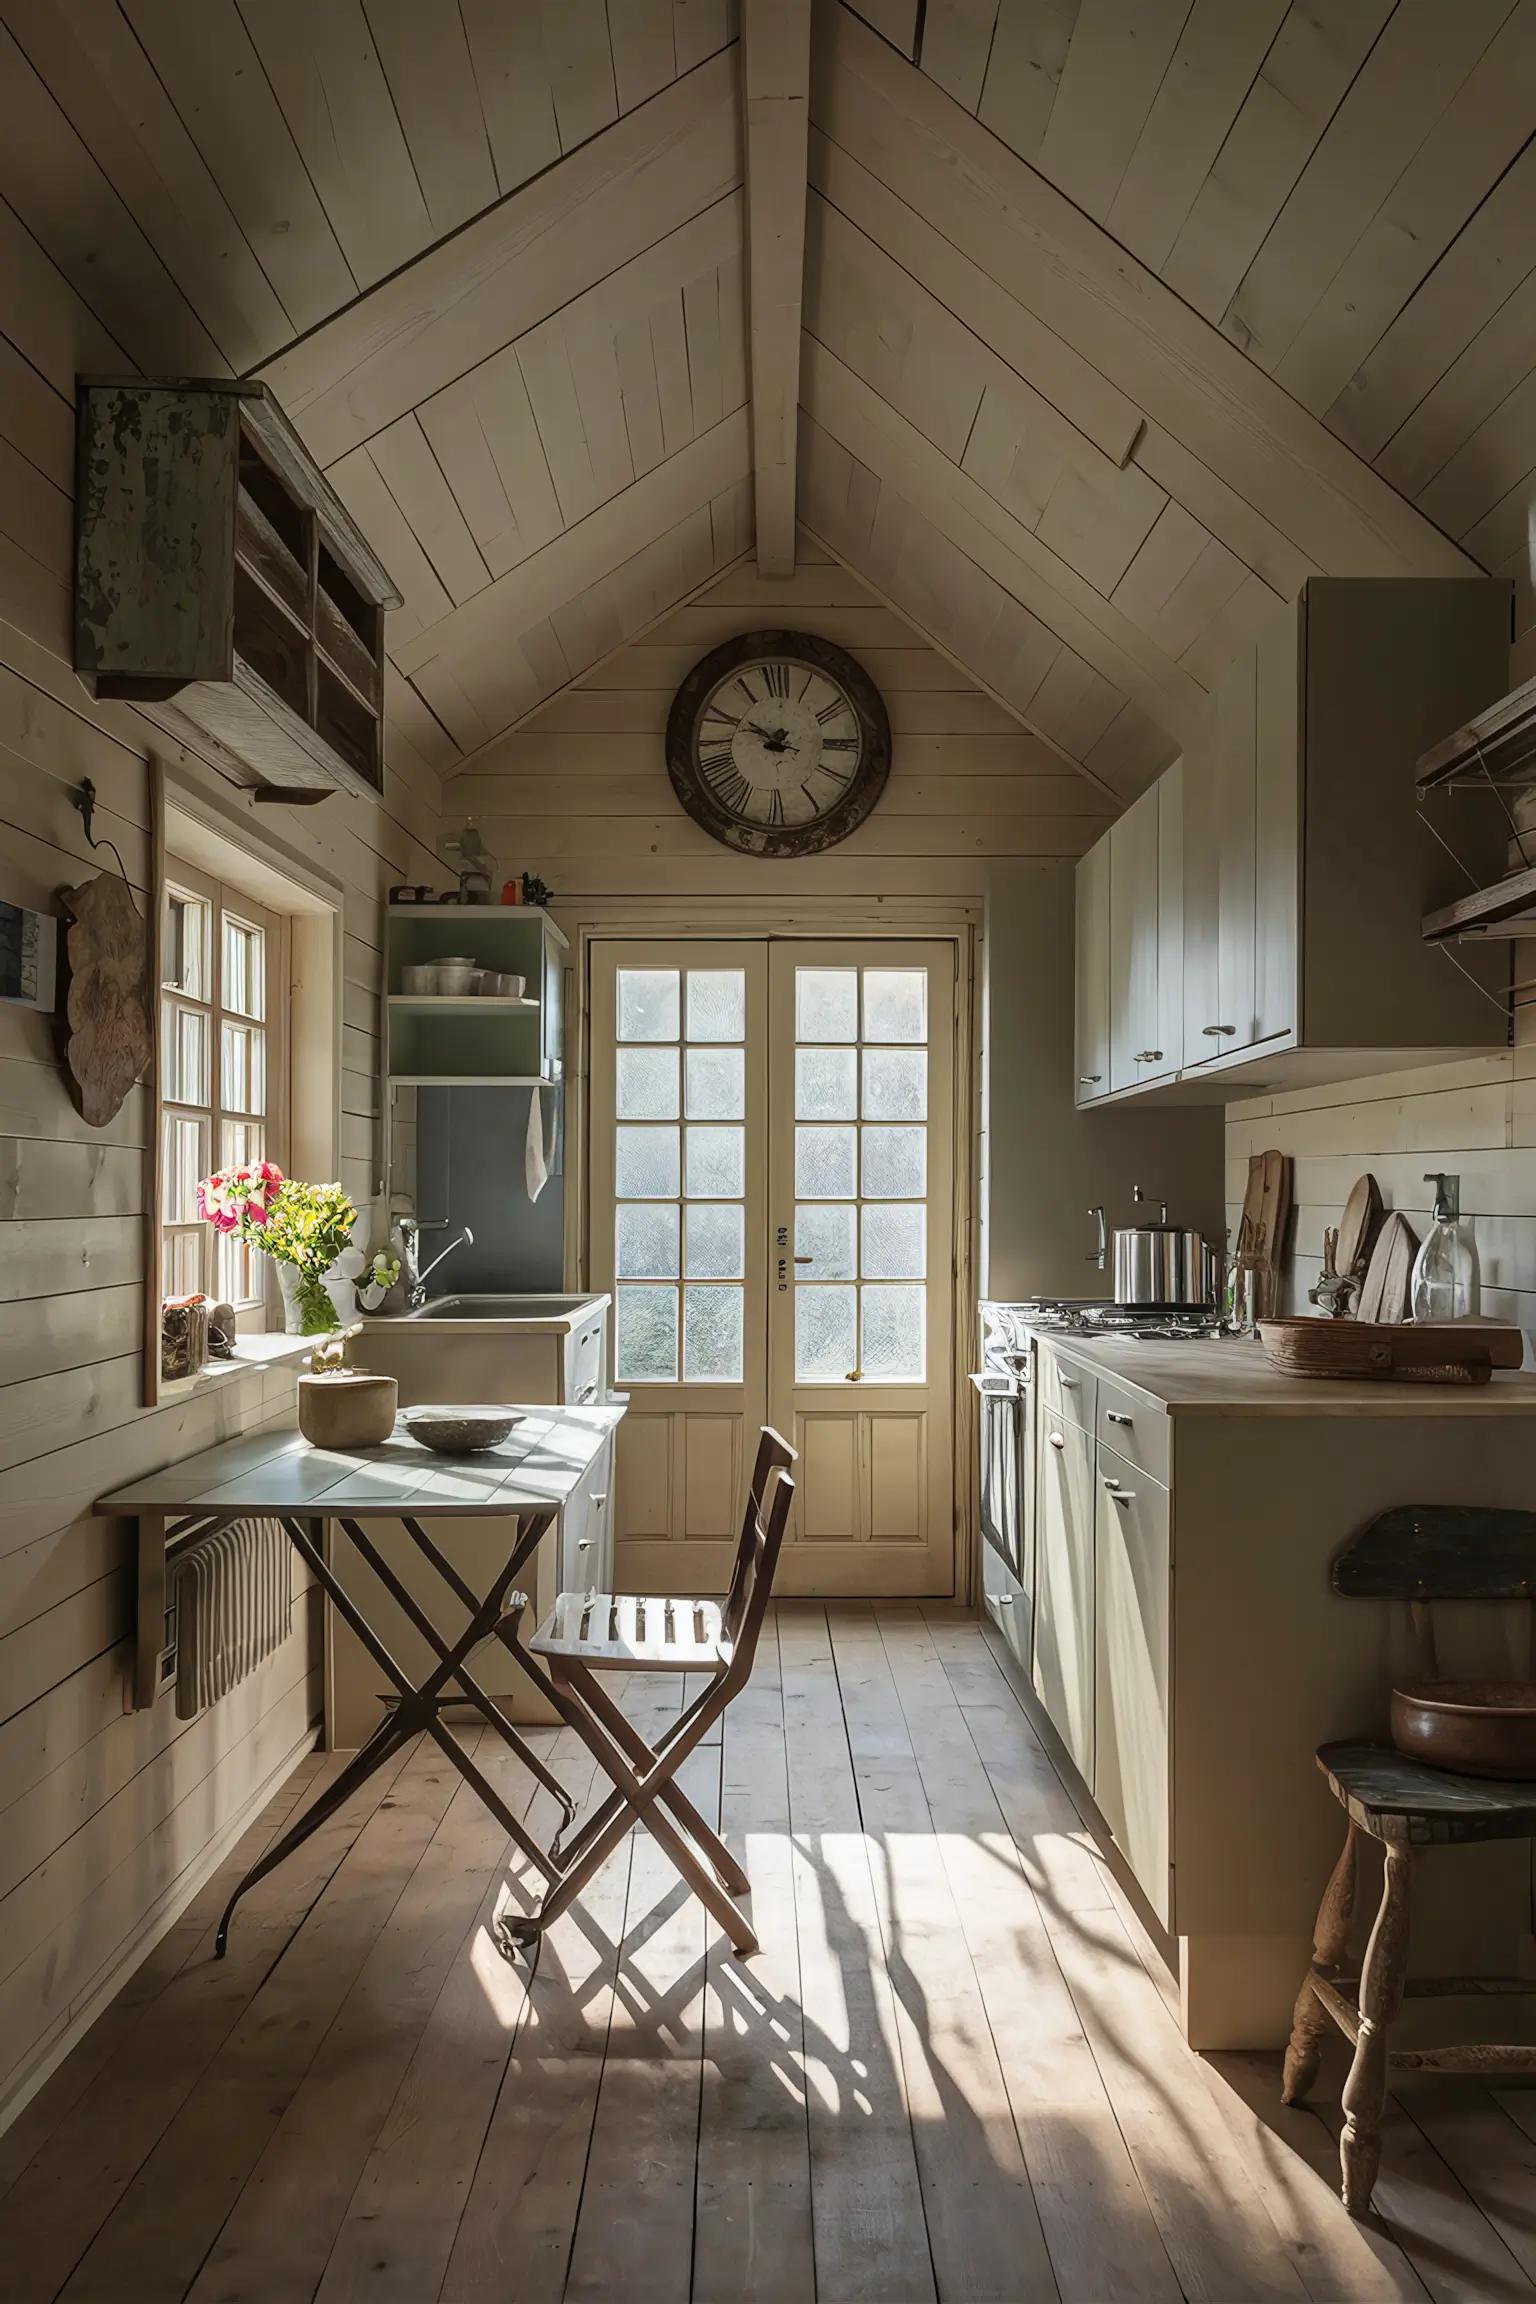 Minimalistic small farmhouse kitchen with space-saving solutions and rustic decor.